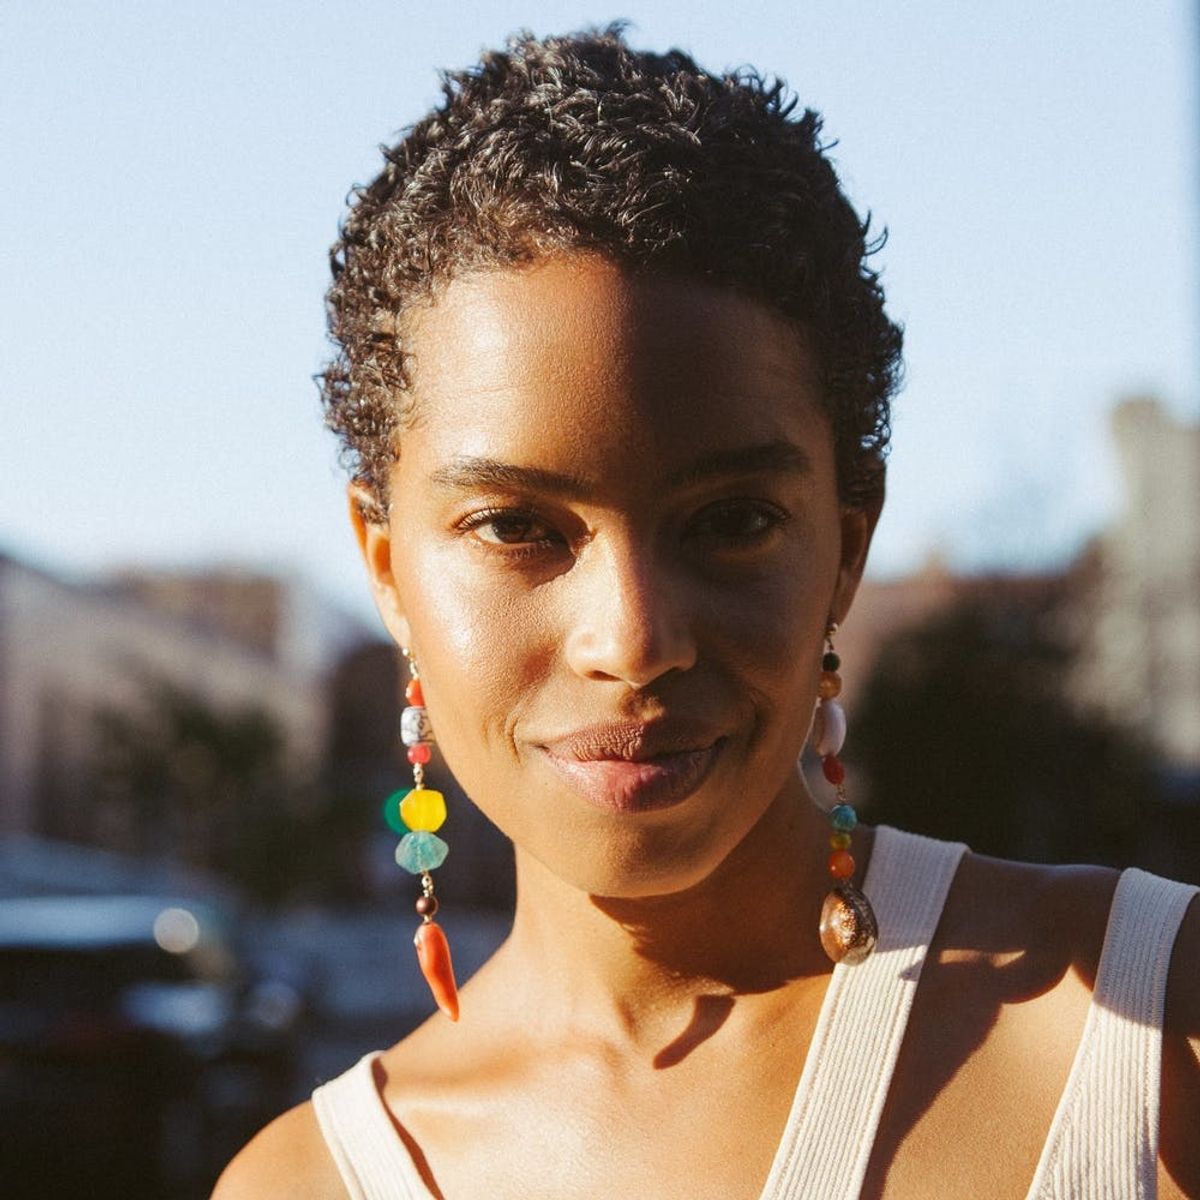 These Colorful Earrings Are the Definition of Recycled Chic